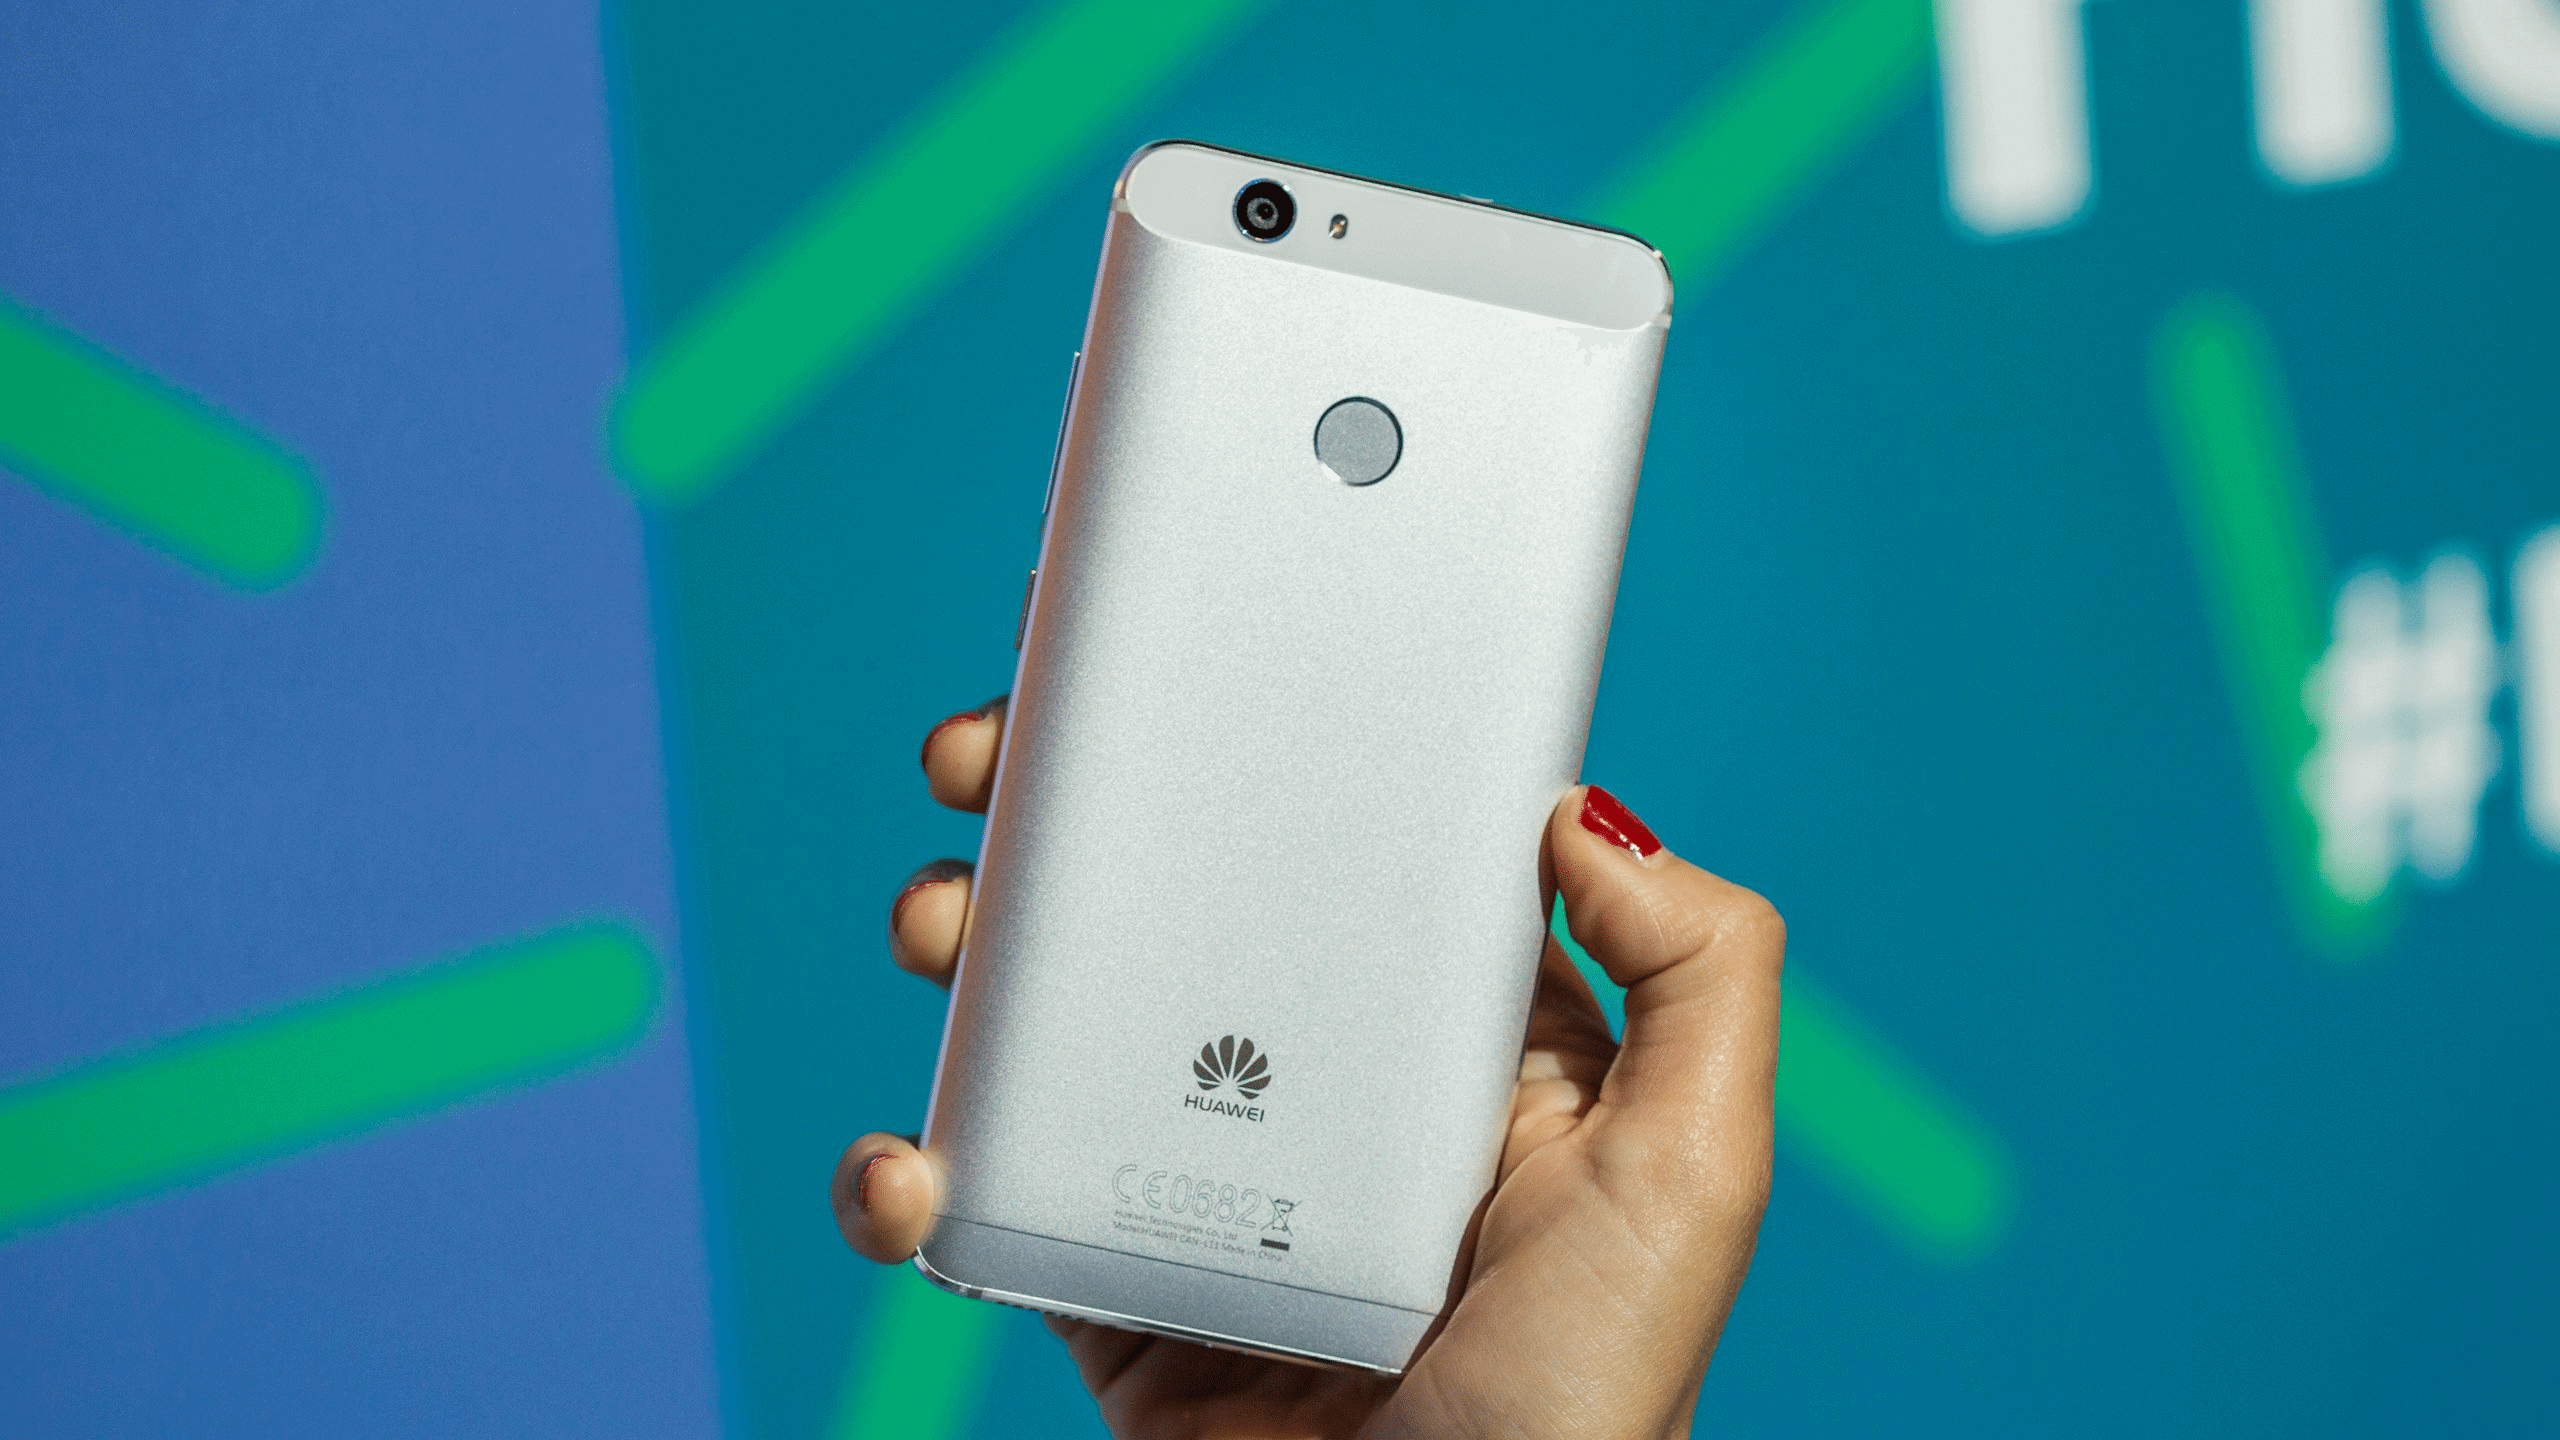 Install B340 Official Update Android 7.0 Nougat On Huawei Nova CAN-L01/CAN-L11 1